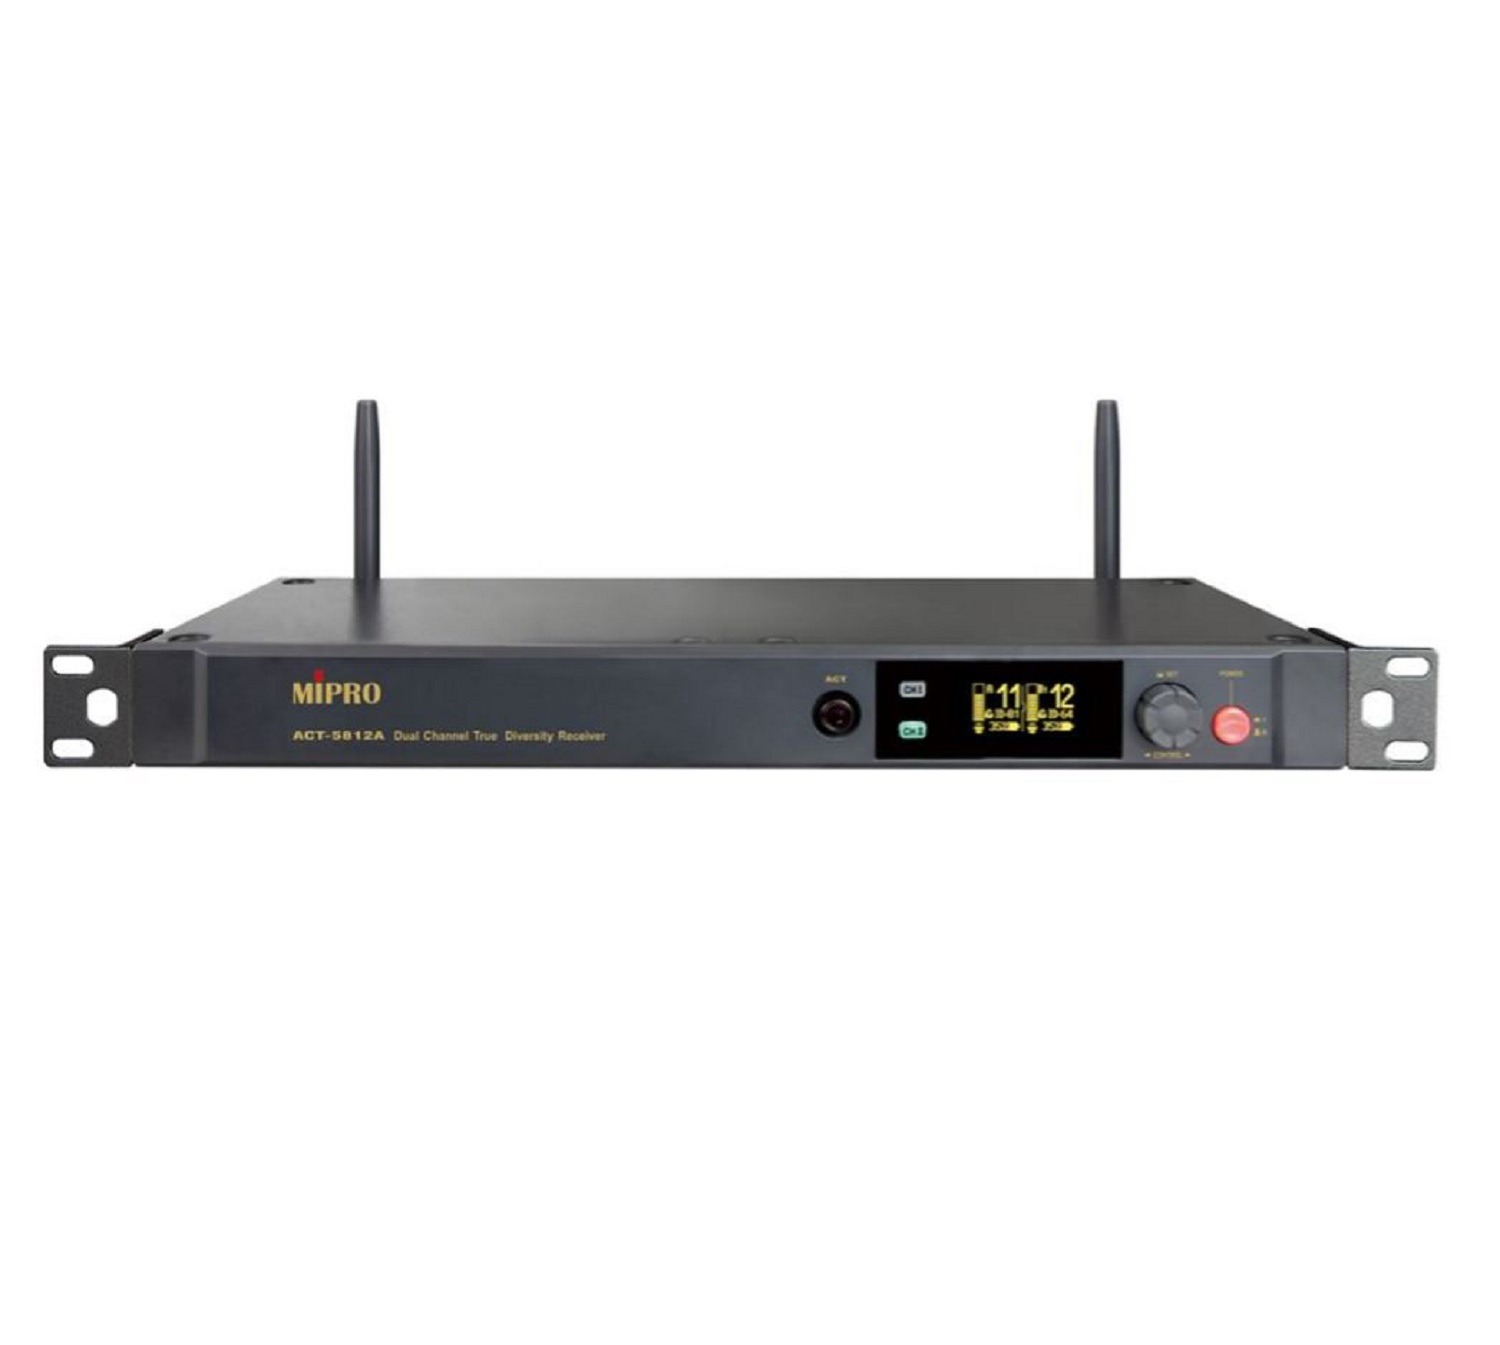 5.8G Full-rack Dual-Channel Digital Receiver Mipro ACT 5812A